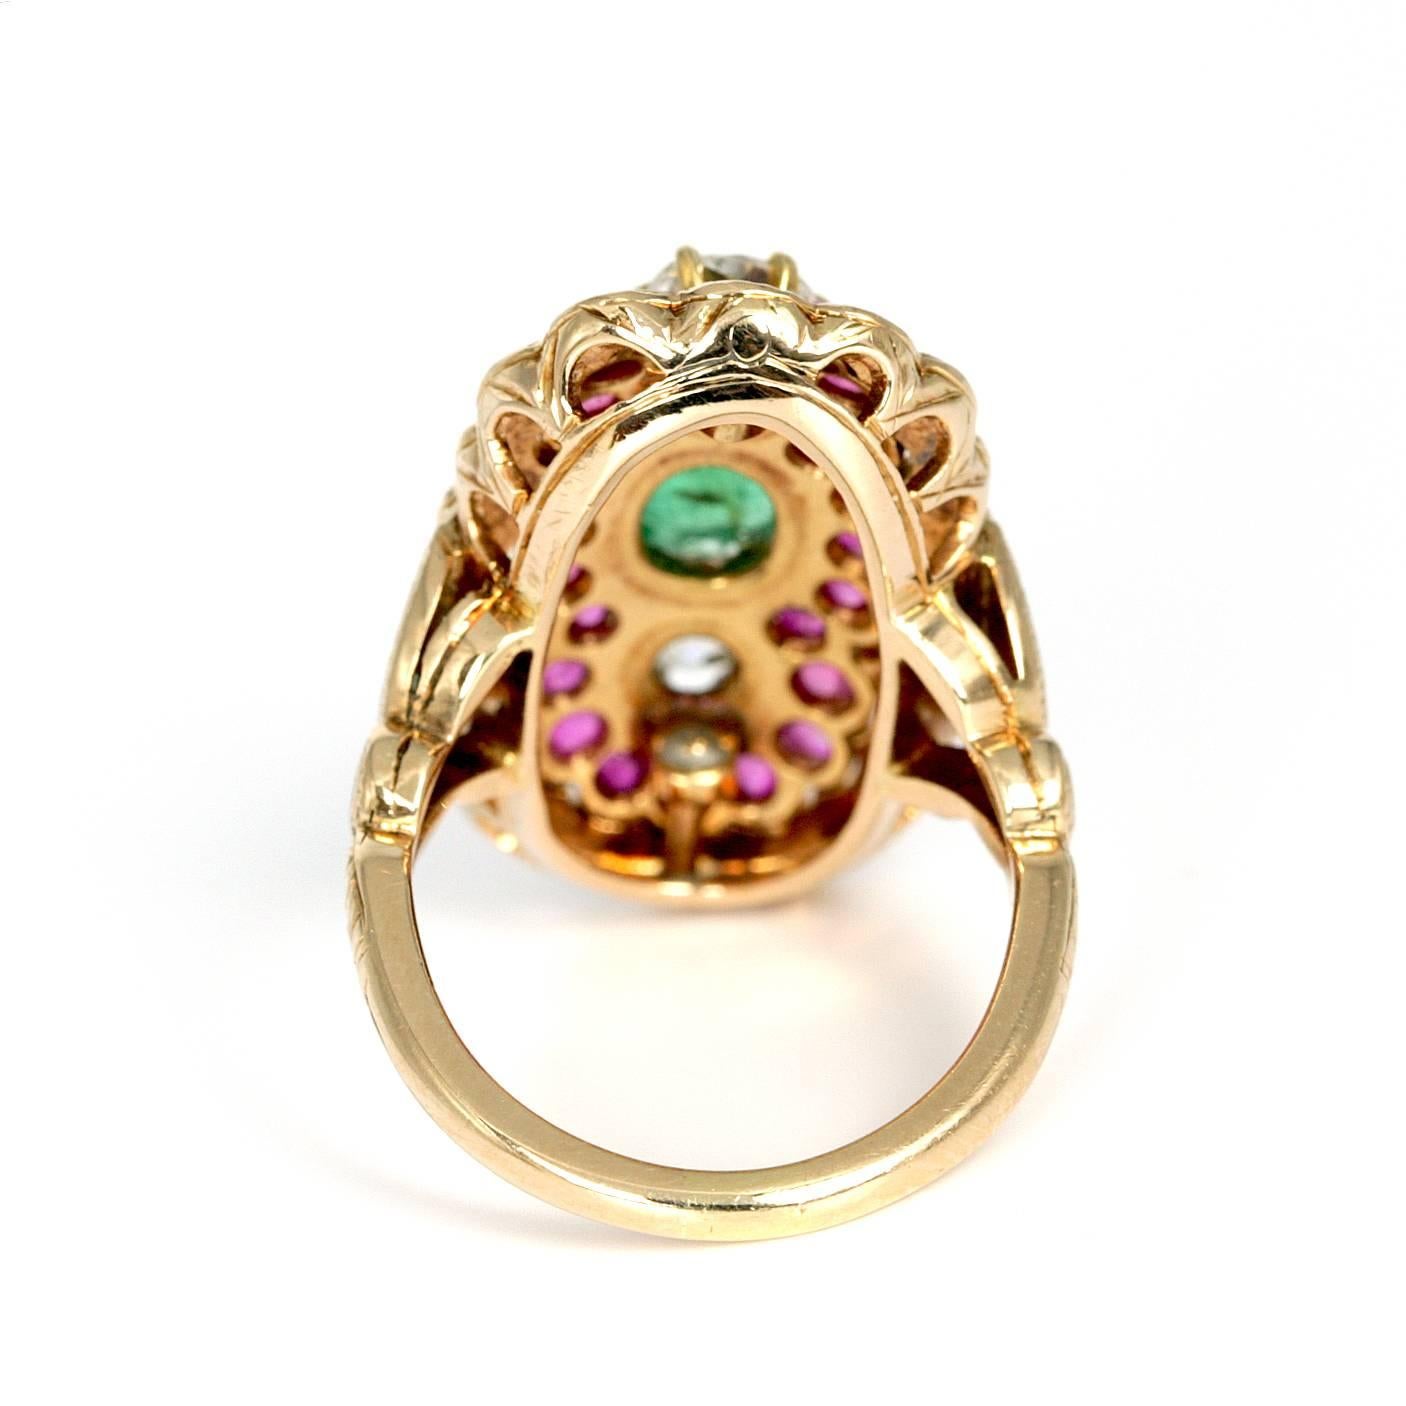 Unique Edwardian 18 Karat Gold Diamond and Cabochon Emerald and Ruby Ring In Excellent Condition For Sale In New York, NY